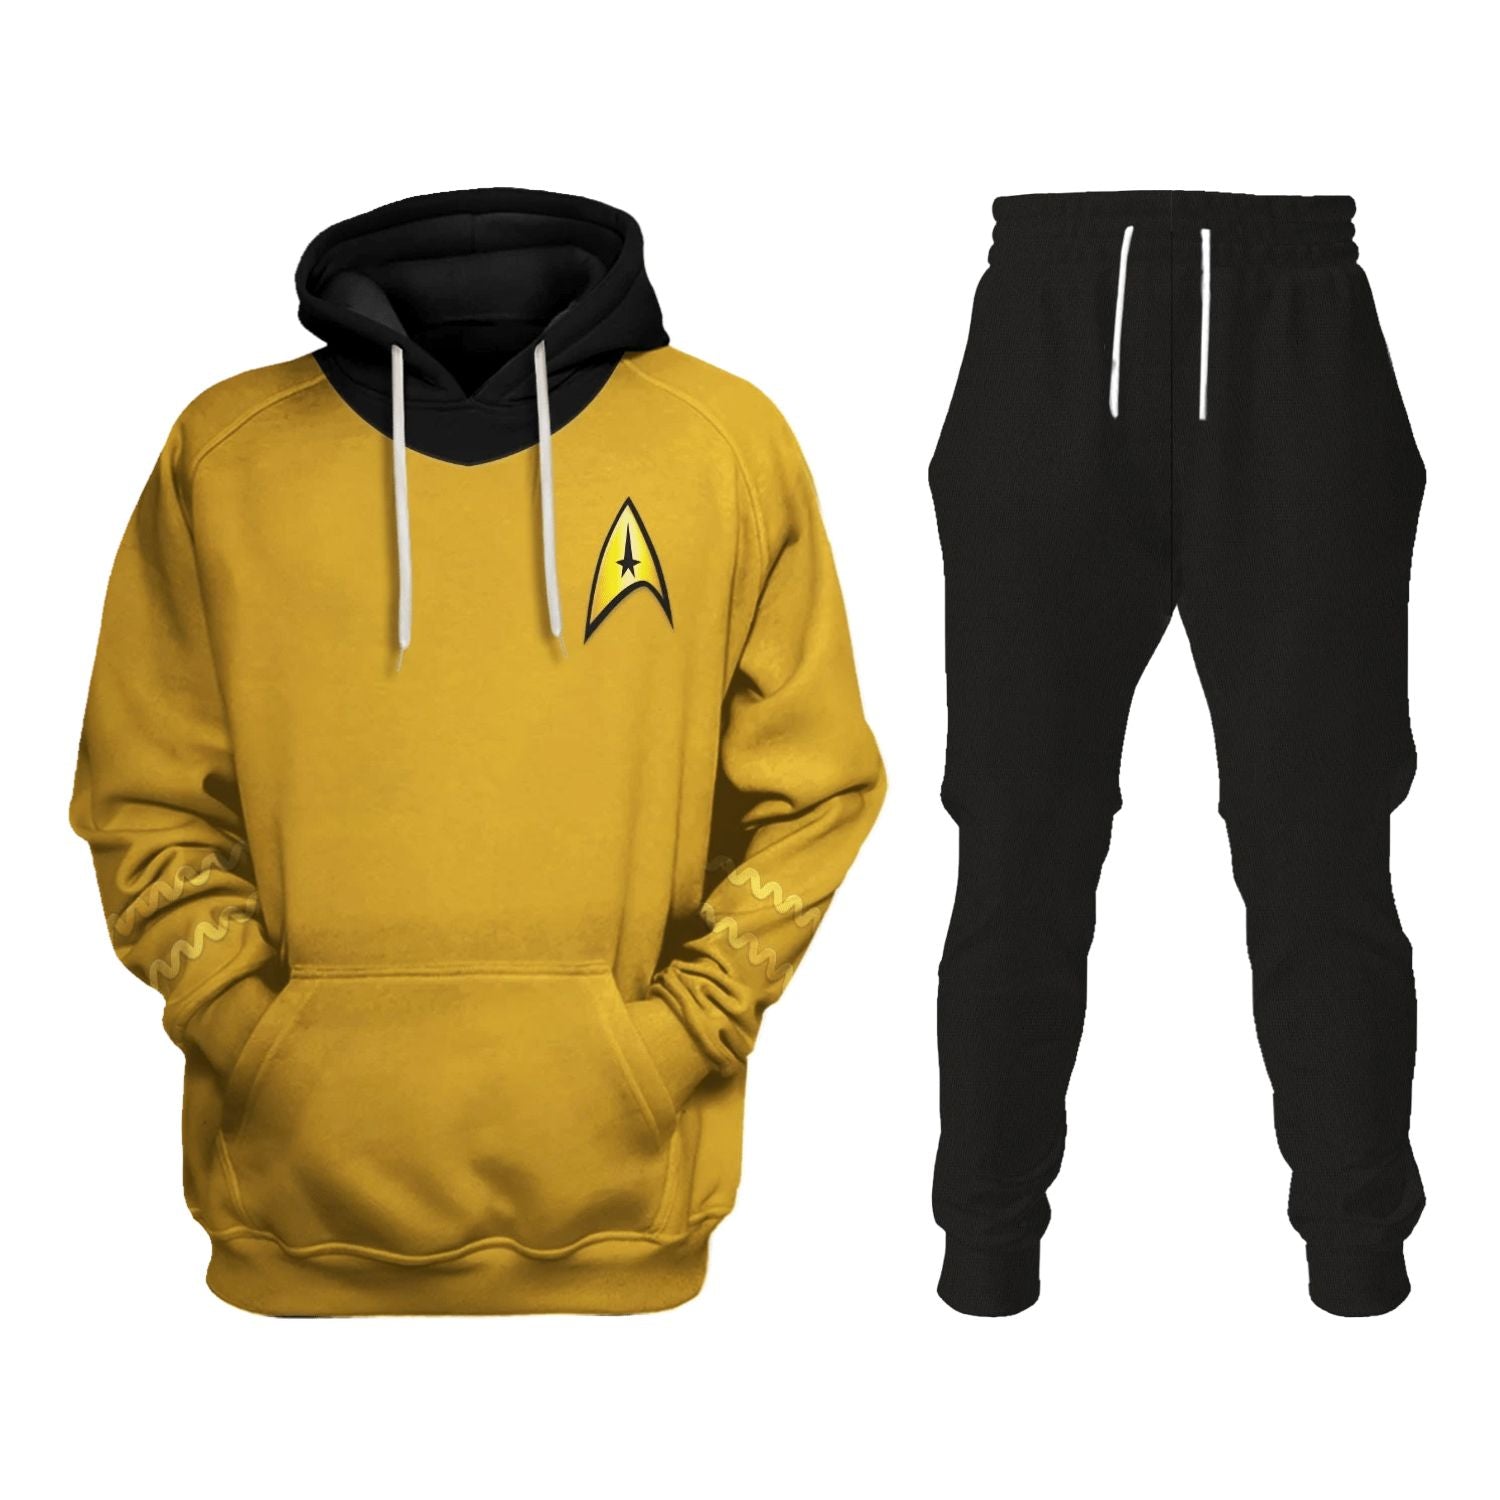 The Original Series Yellow track suit 